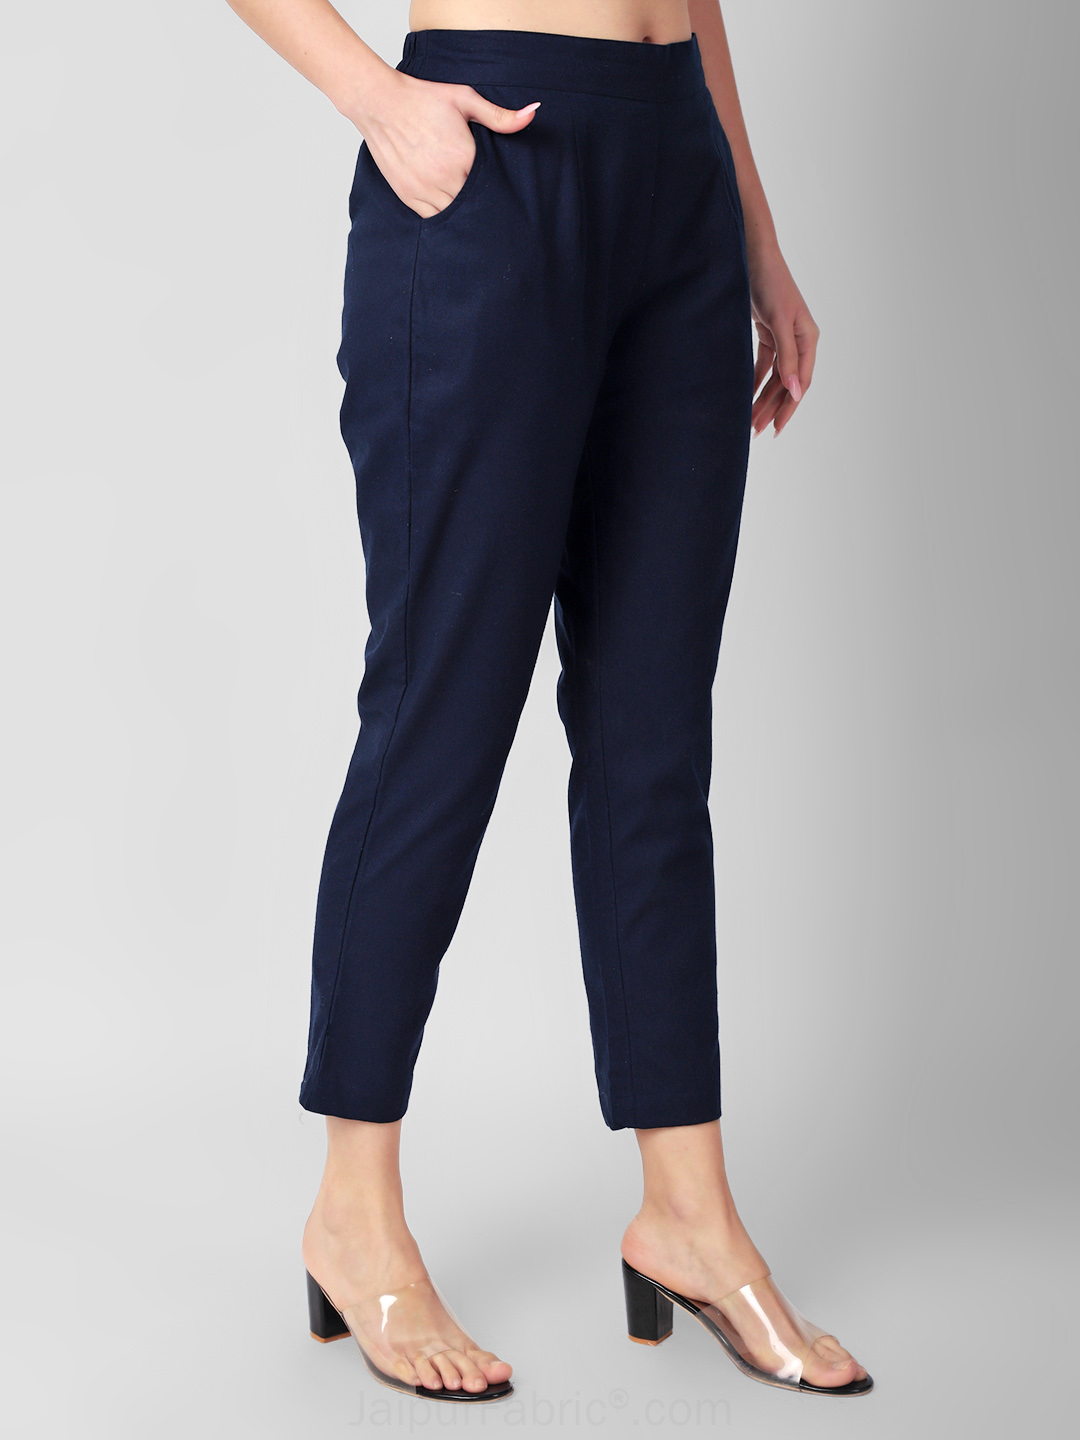 Navy Blue Women Cotton Pants casual and semi formal daily trousers